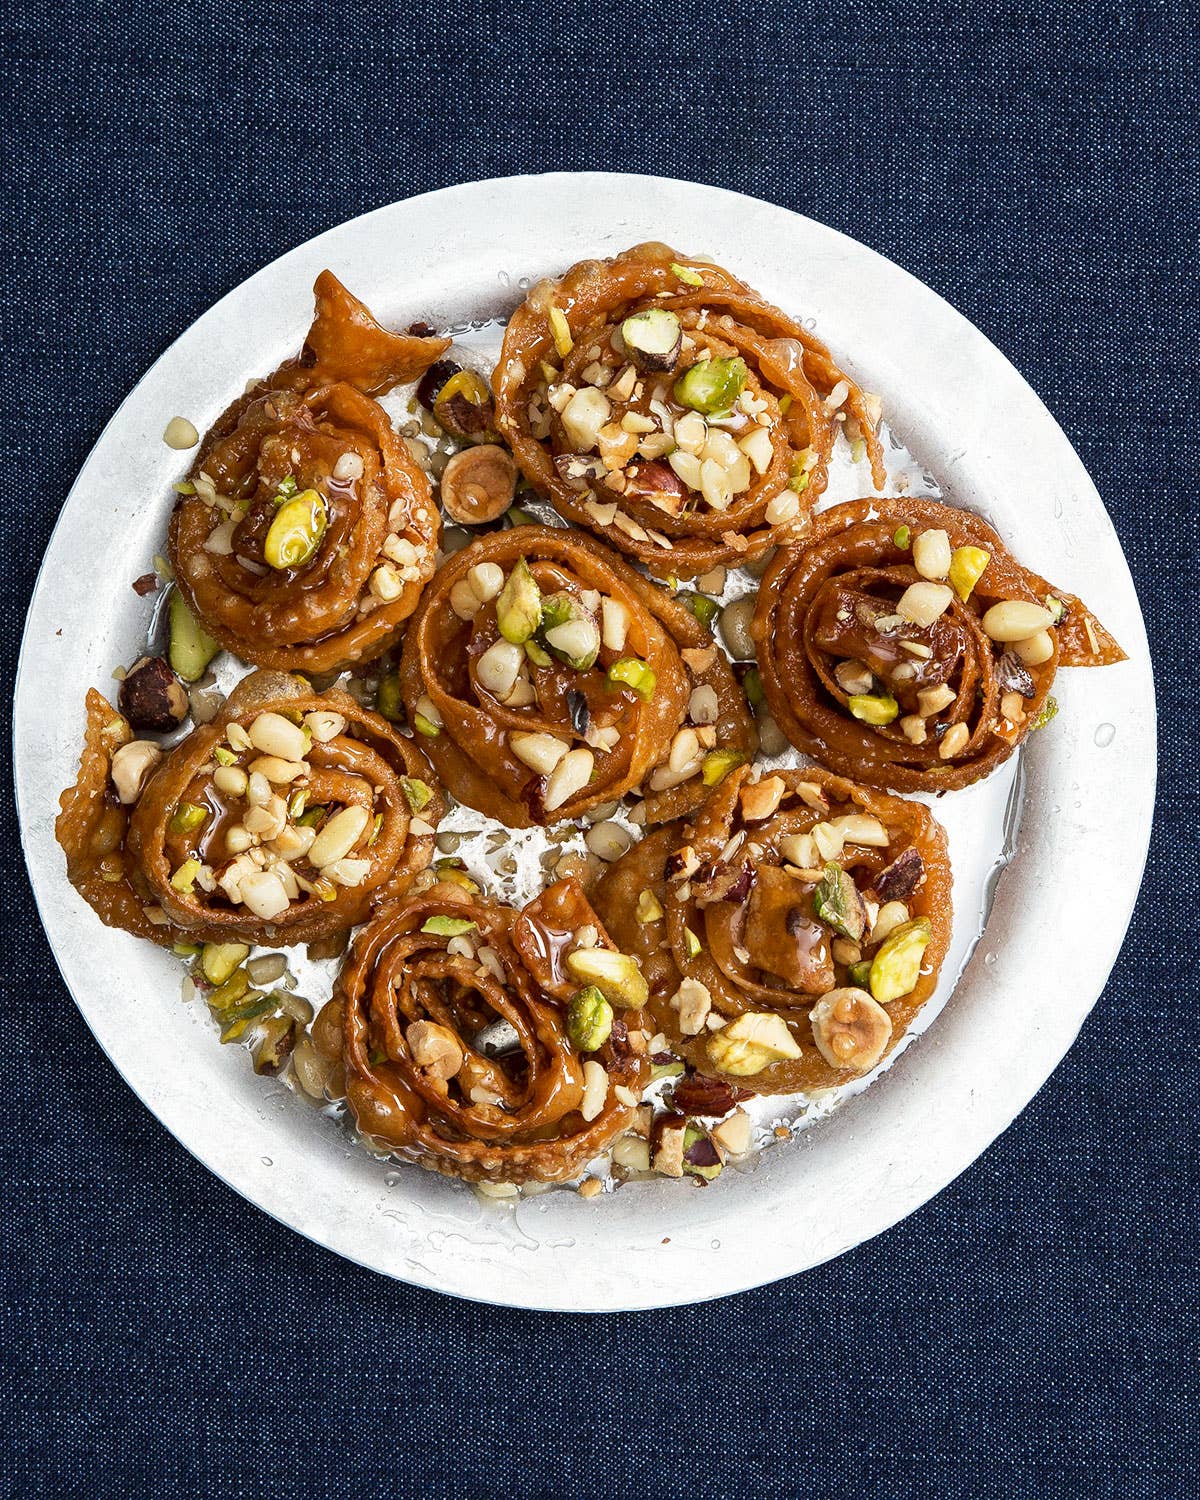 Syrup-Soaked Pastries with Hazelnuts, Pistachios, and Pine Nuts (Deblah)